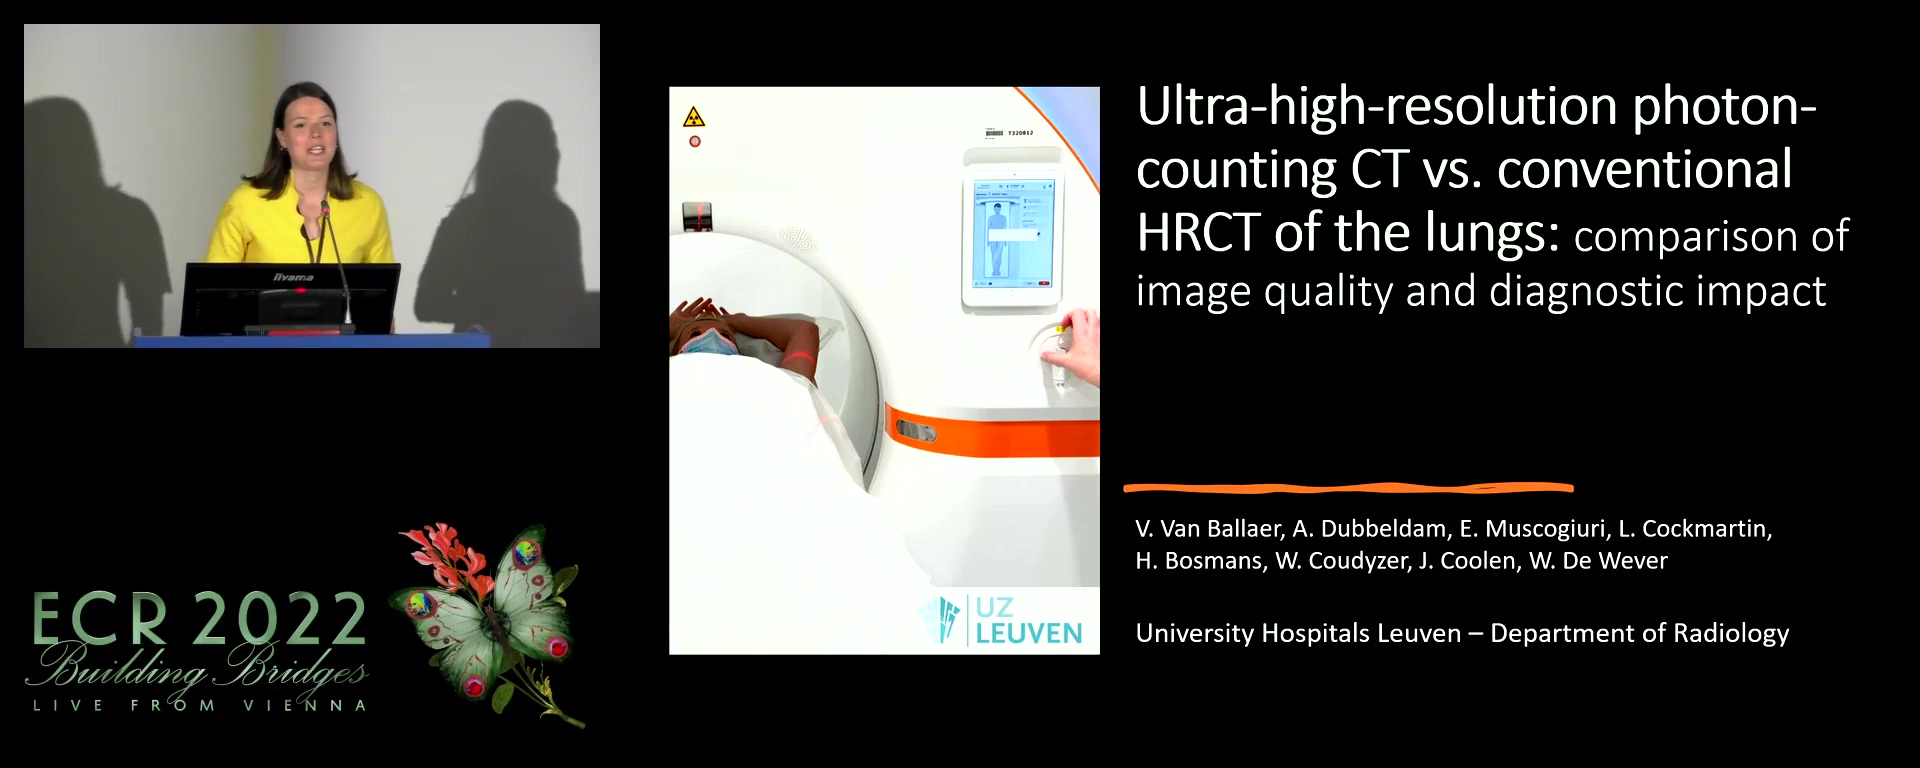 Ultra-high-resolution photon-counting CT versus conventional HRCT of the lungs: a comparison of image quality and diagnostic impact - Valerie Van Ballaer, Leuven / BE